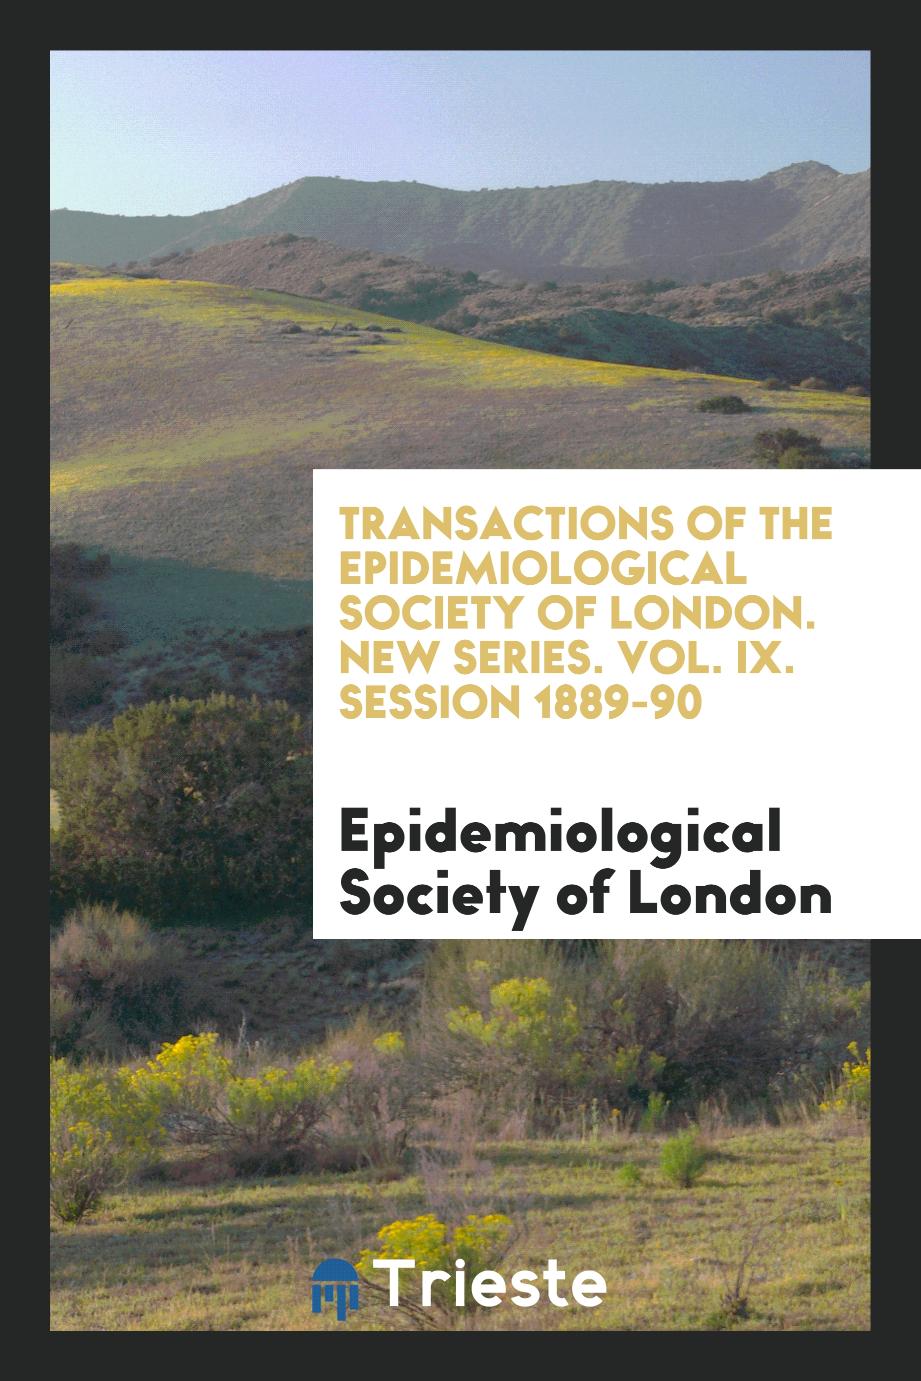 Transactions of the Epidemiological Society of London. New Series. Vol. IX. Session 1889-90